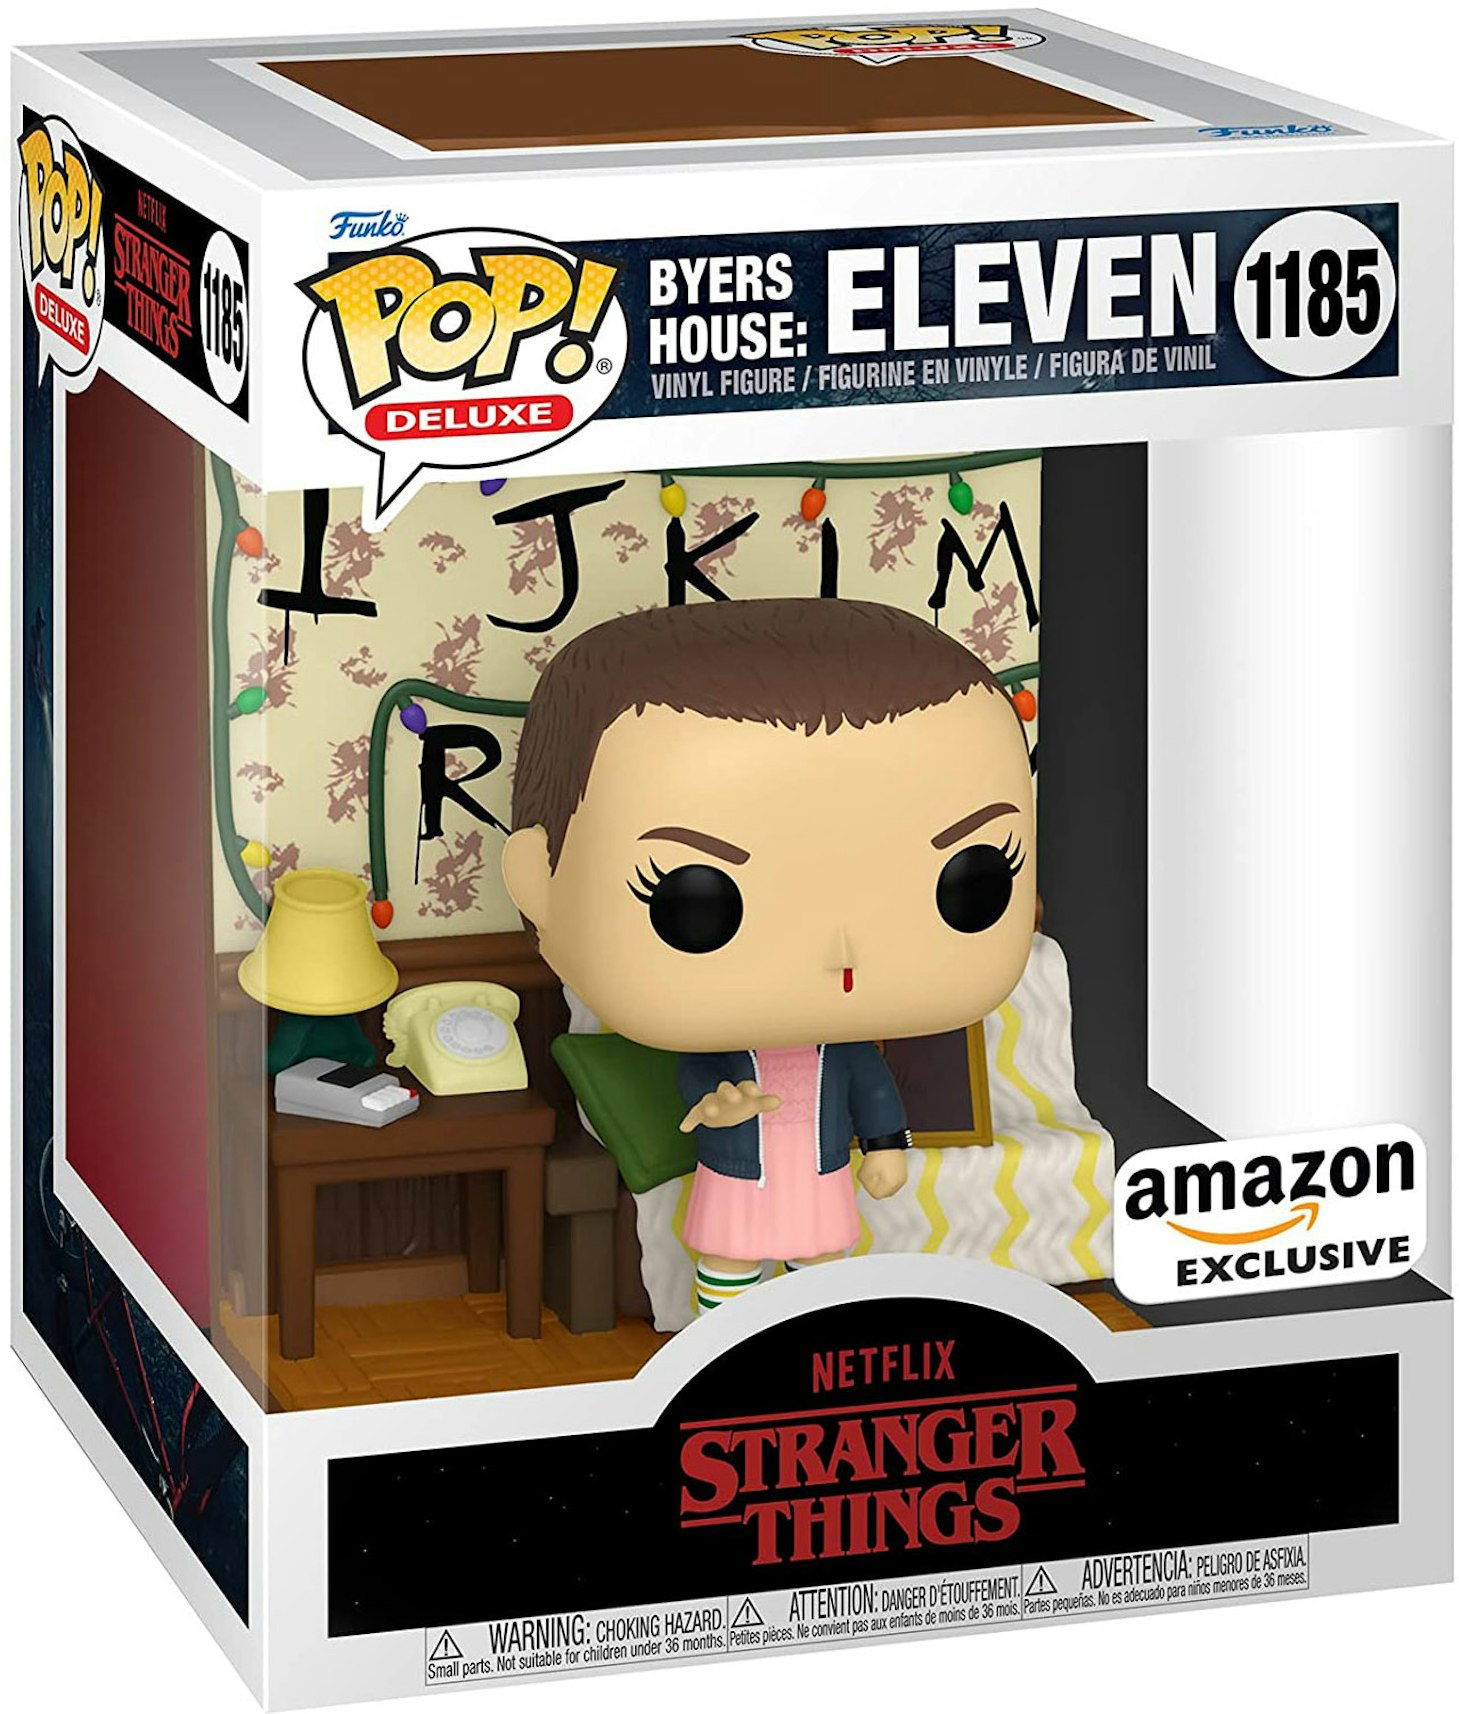 Funko Stranger Things Byers House: Eleven Amazon Exclusive #1185 - FW21 - US